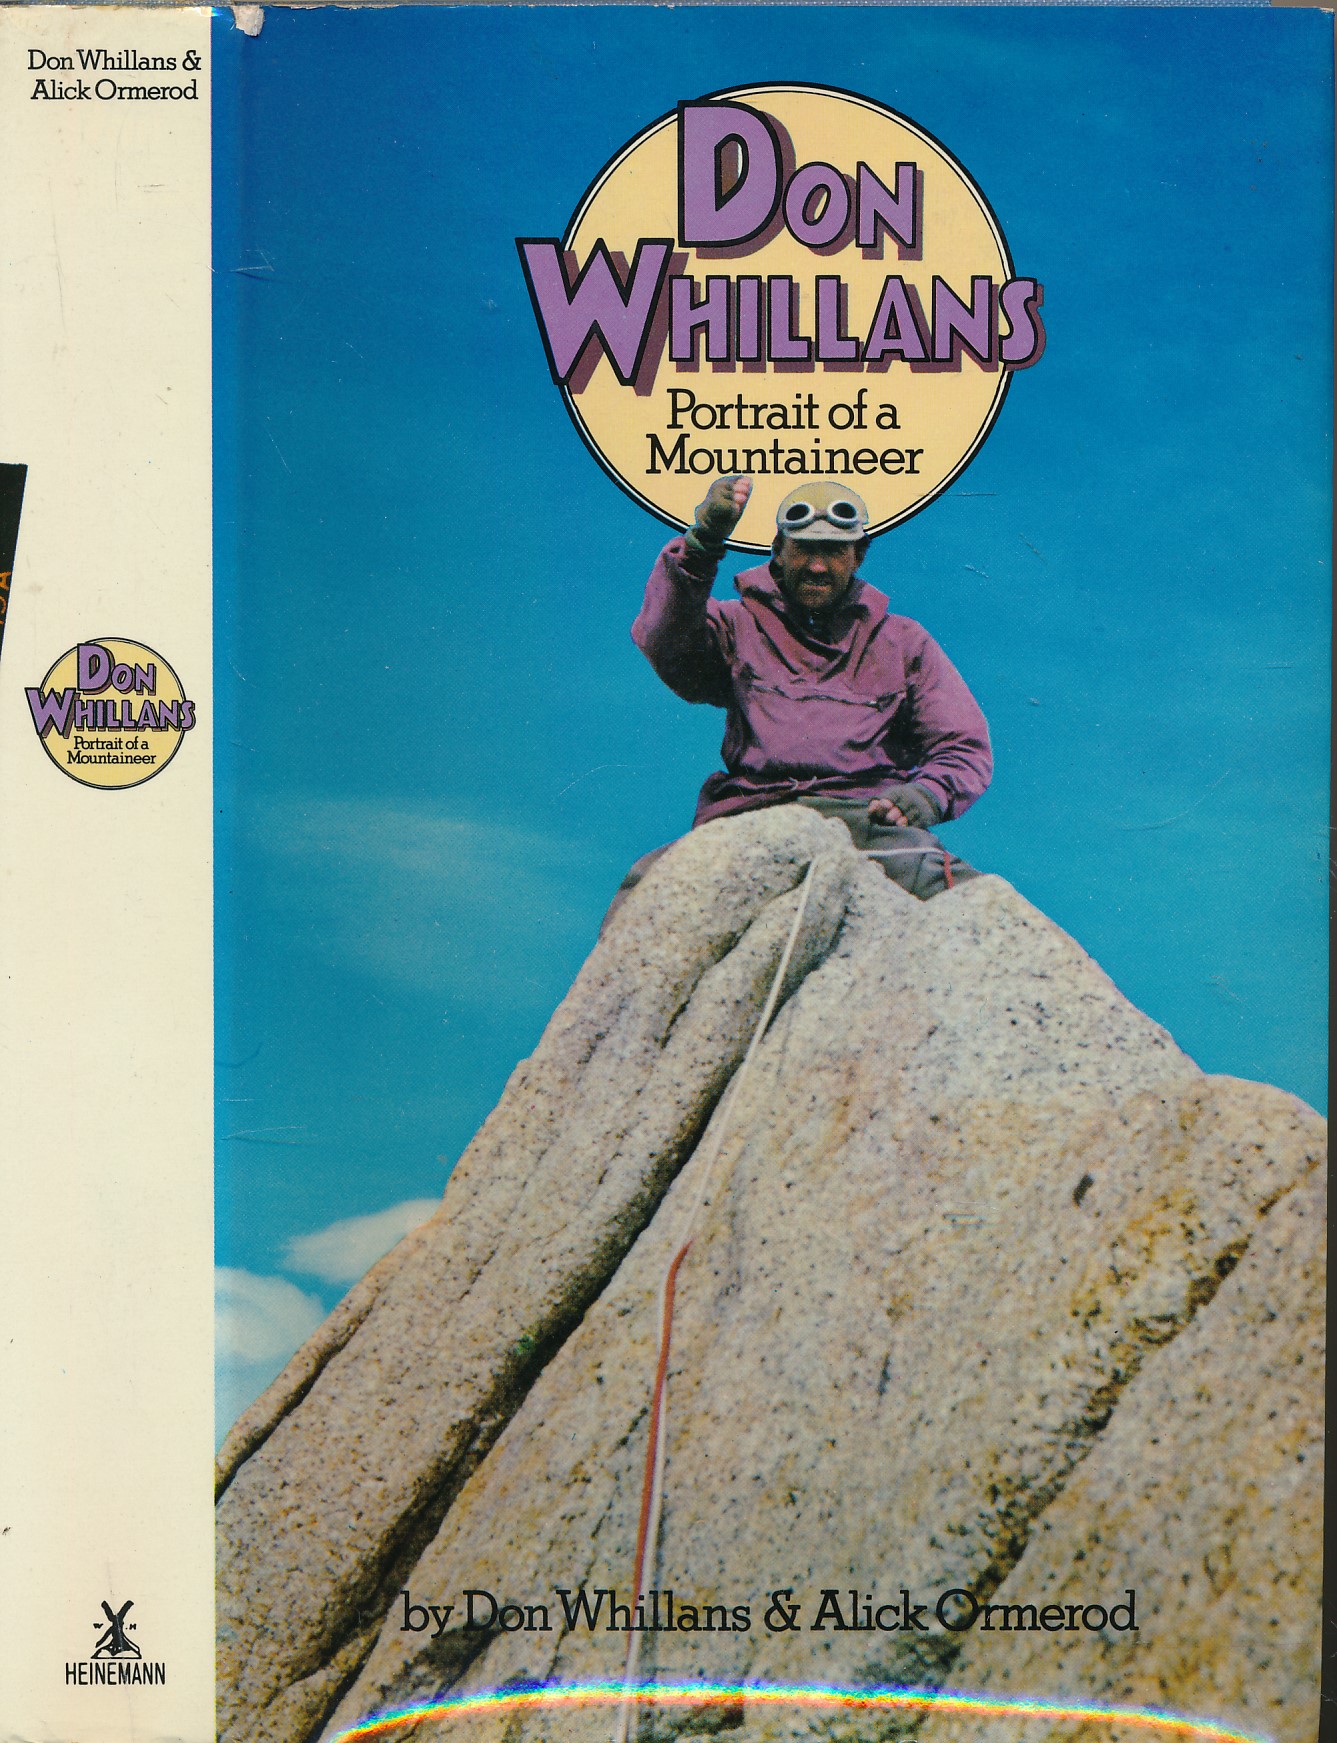 Don Whillans: Portrait of a Mountaineer.